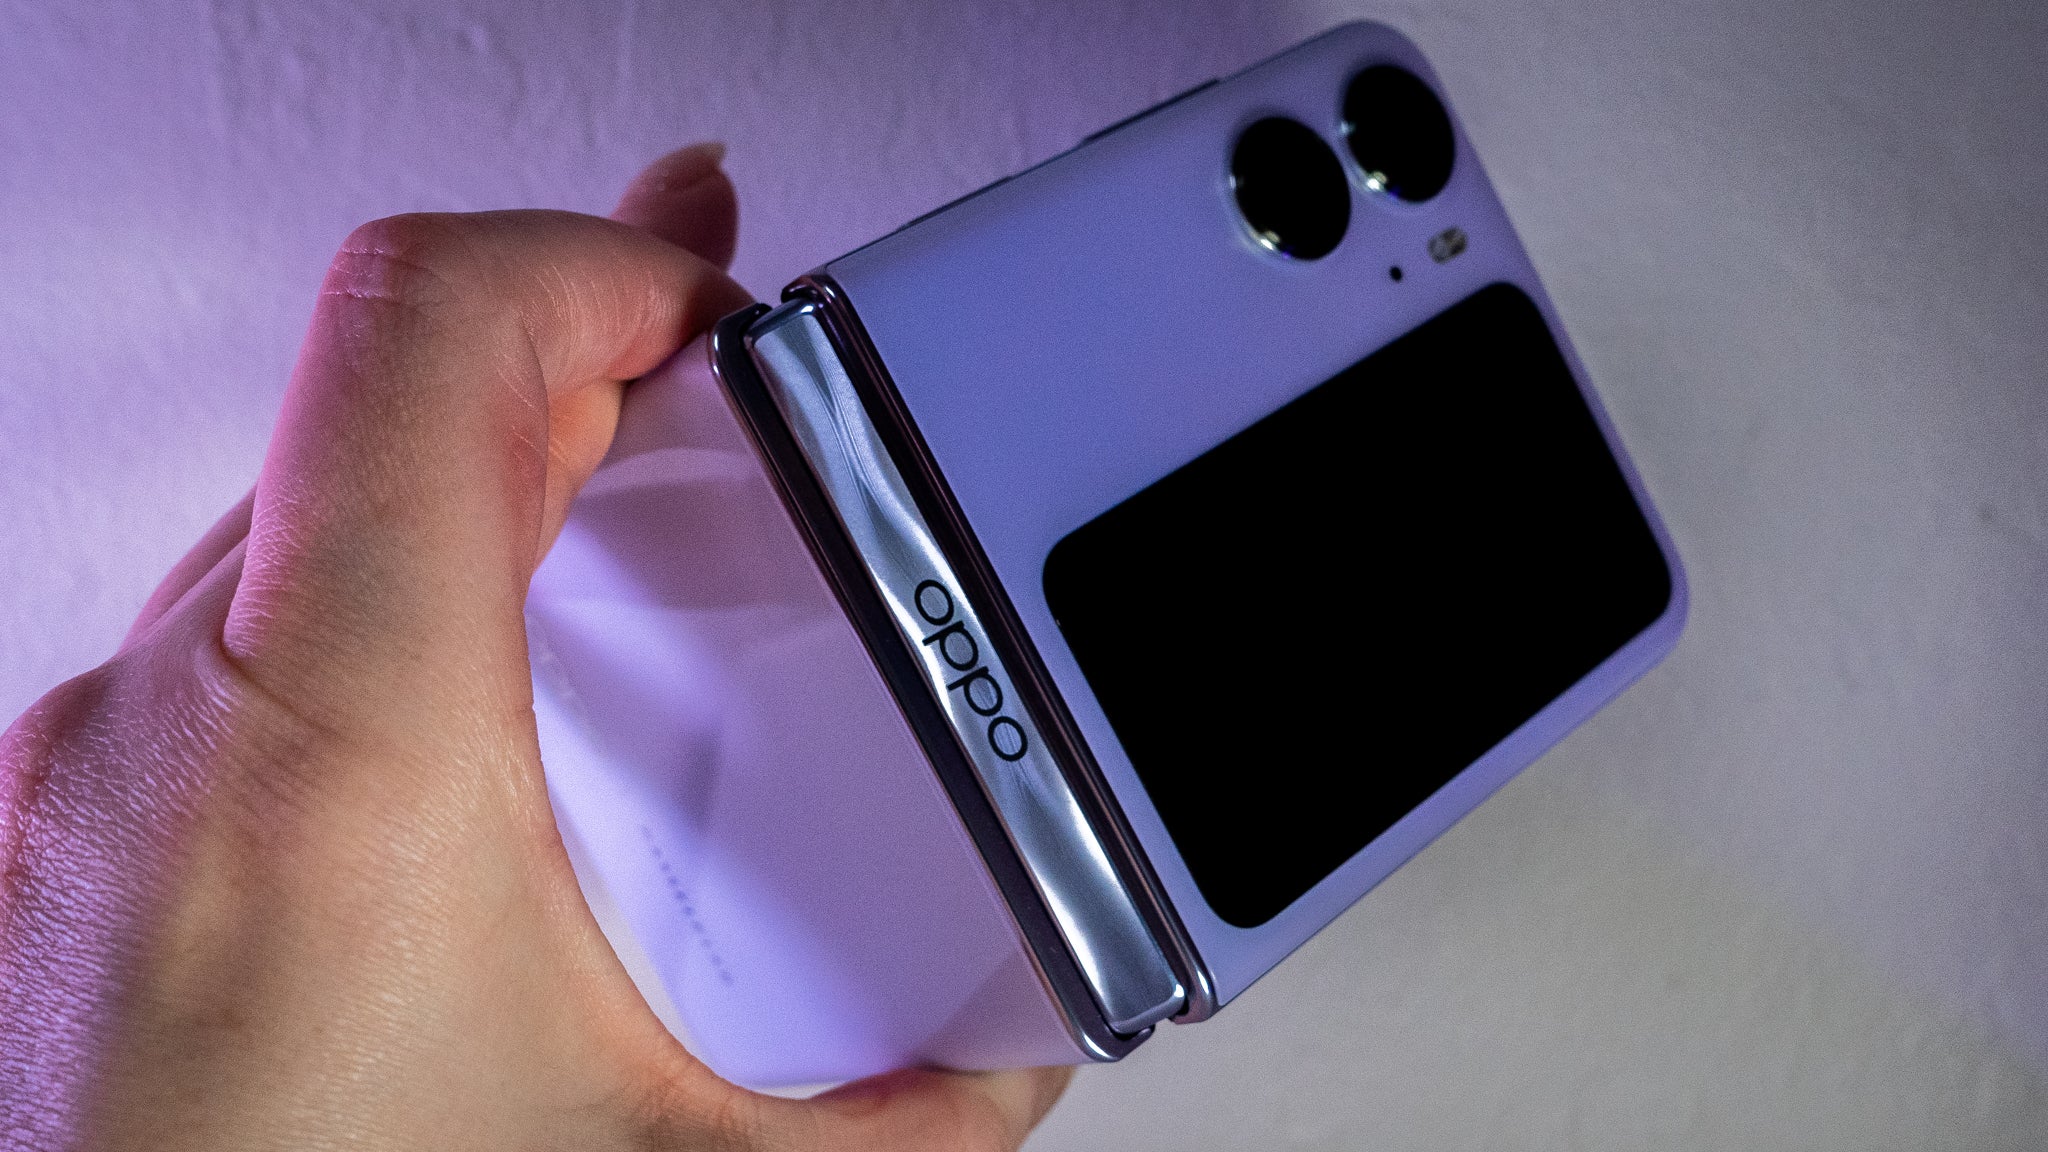 At first glance, it's hard to notice this is an Oppo product and not a Samsung one. (Photo: Florence Ion / Gizmodo)